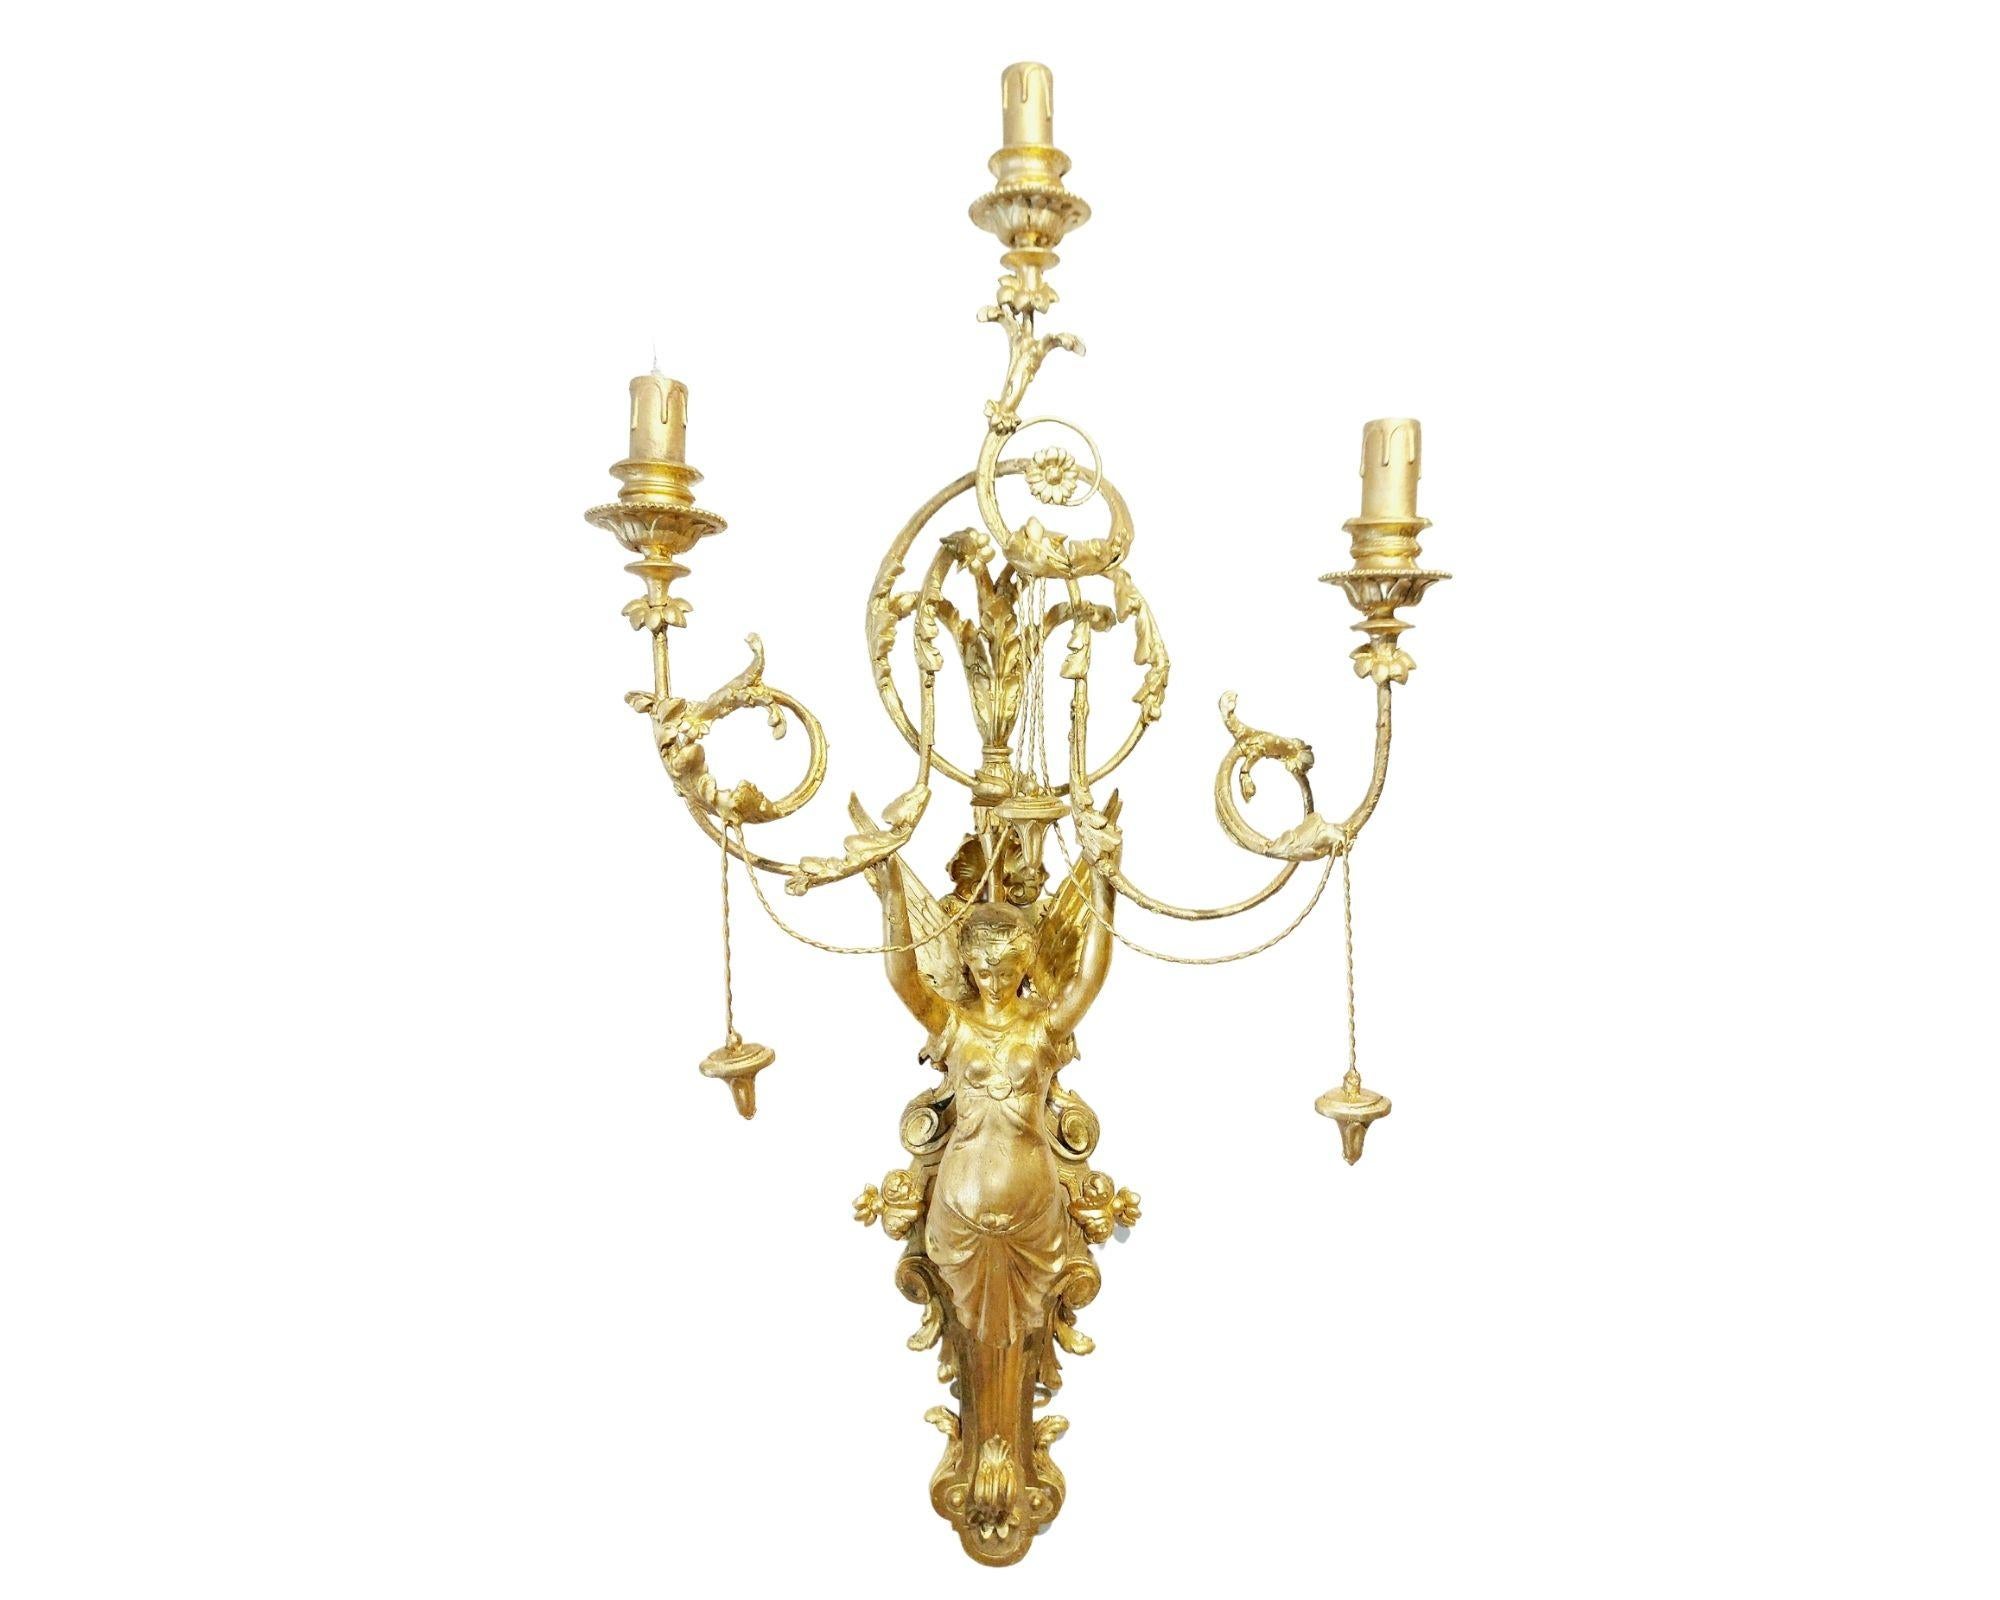 Pair of Italian Neoclassic Empire Gilt Wood Wall Sconces For Sale 1